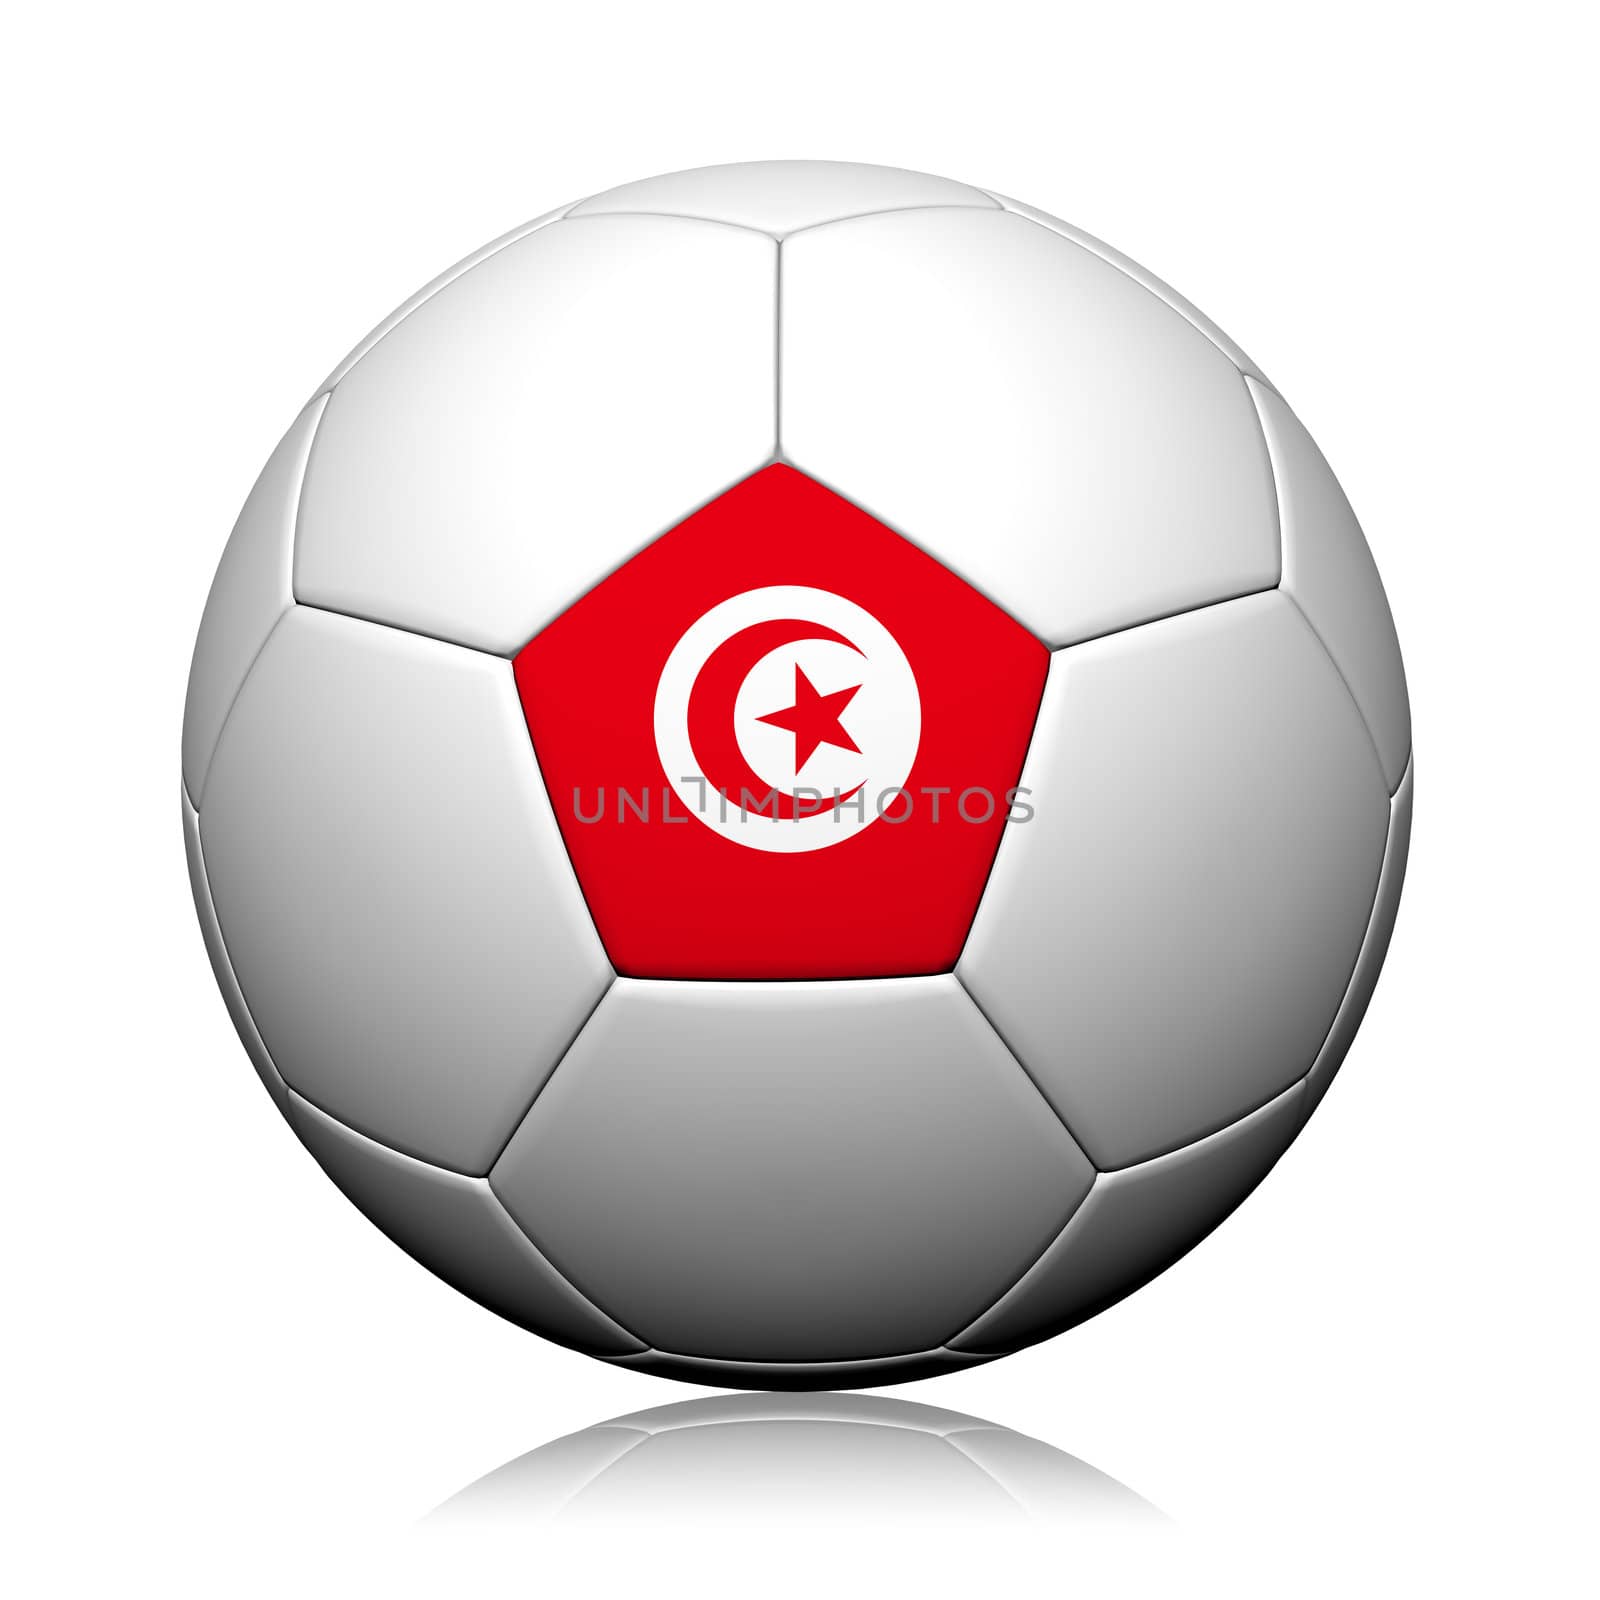 Tunisia Flag Pattern 3d rendering of a soccer ball by jakgree